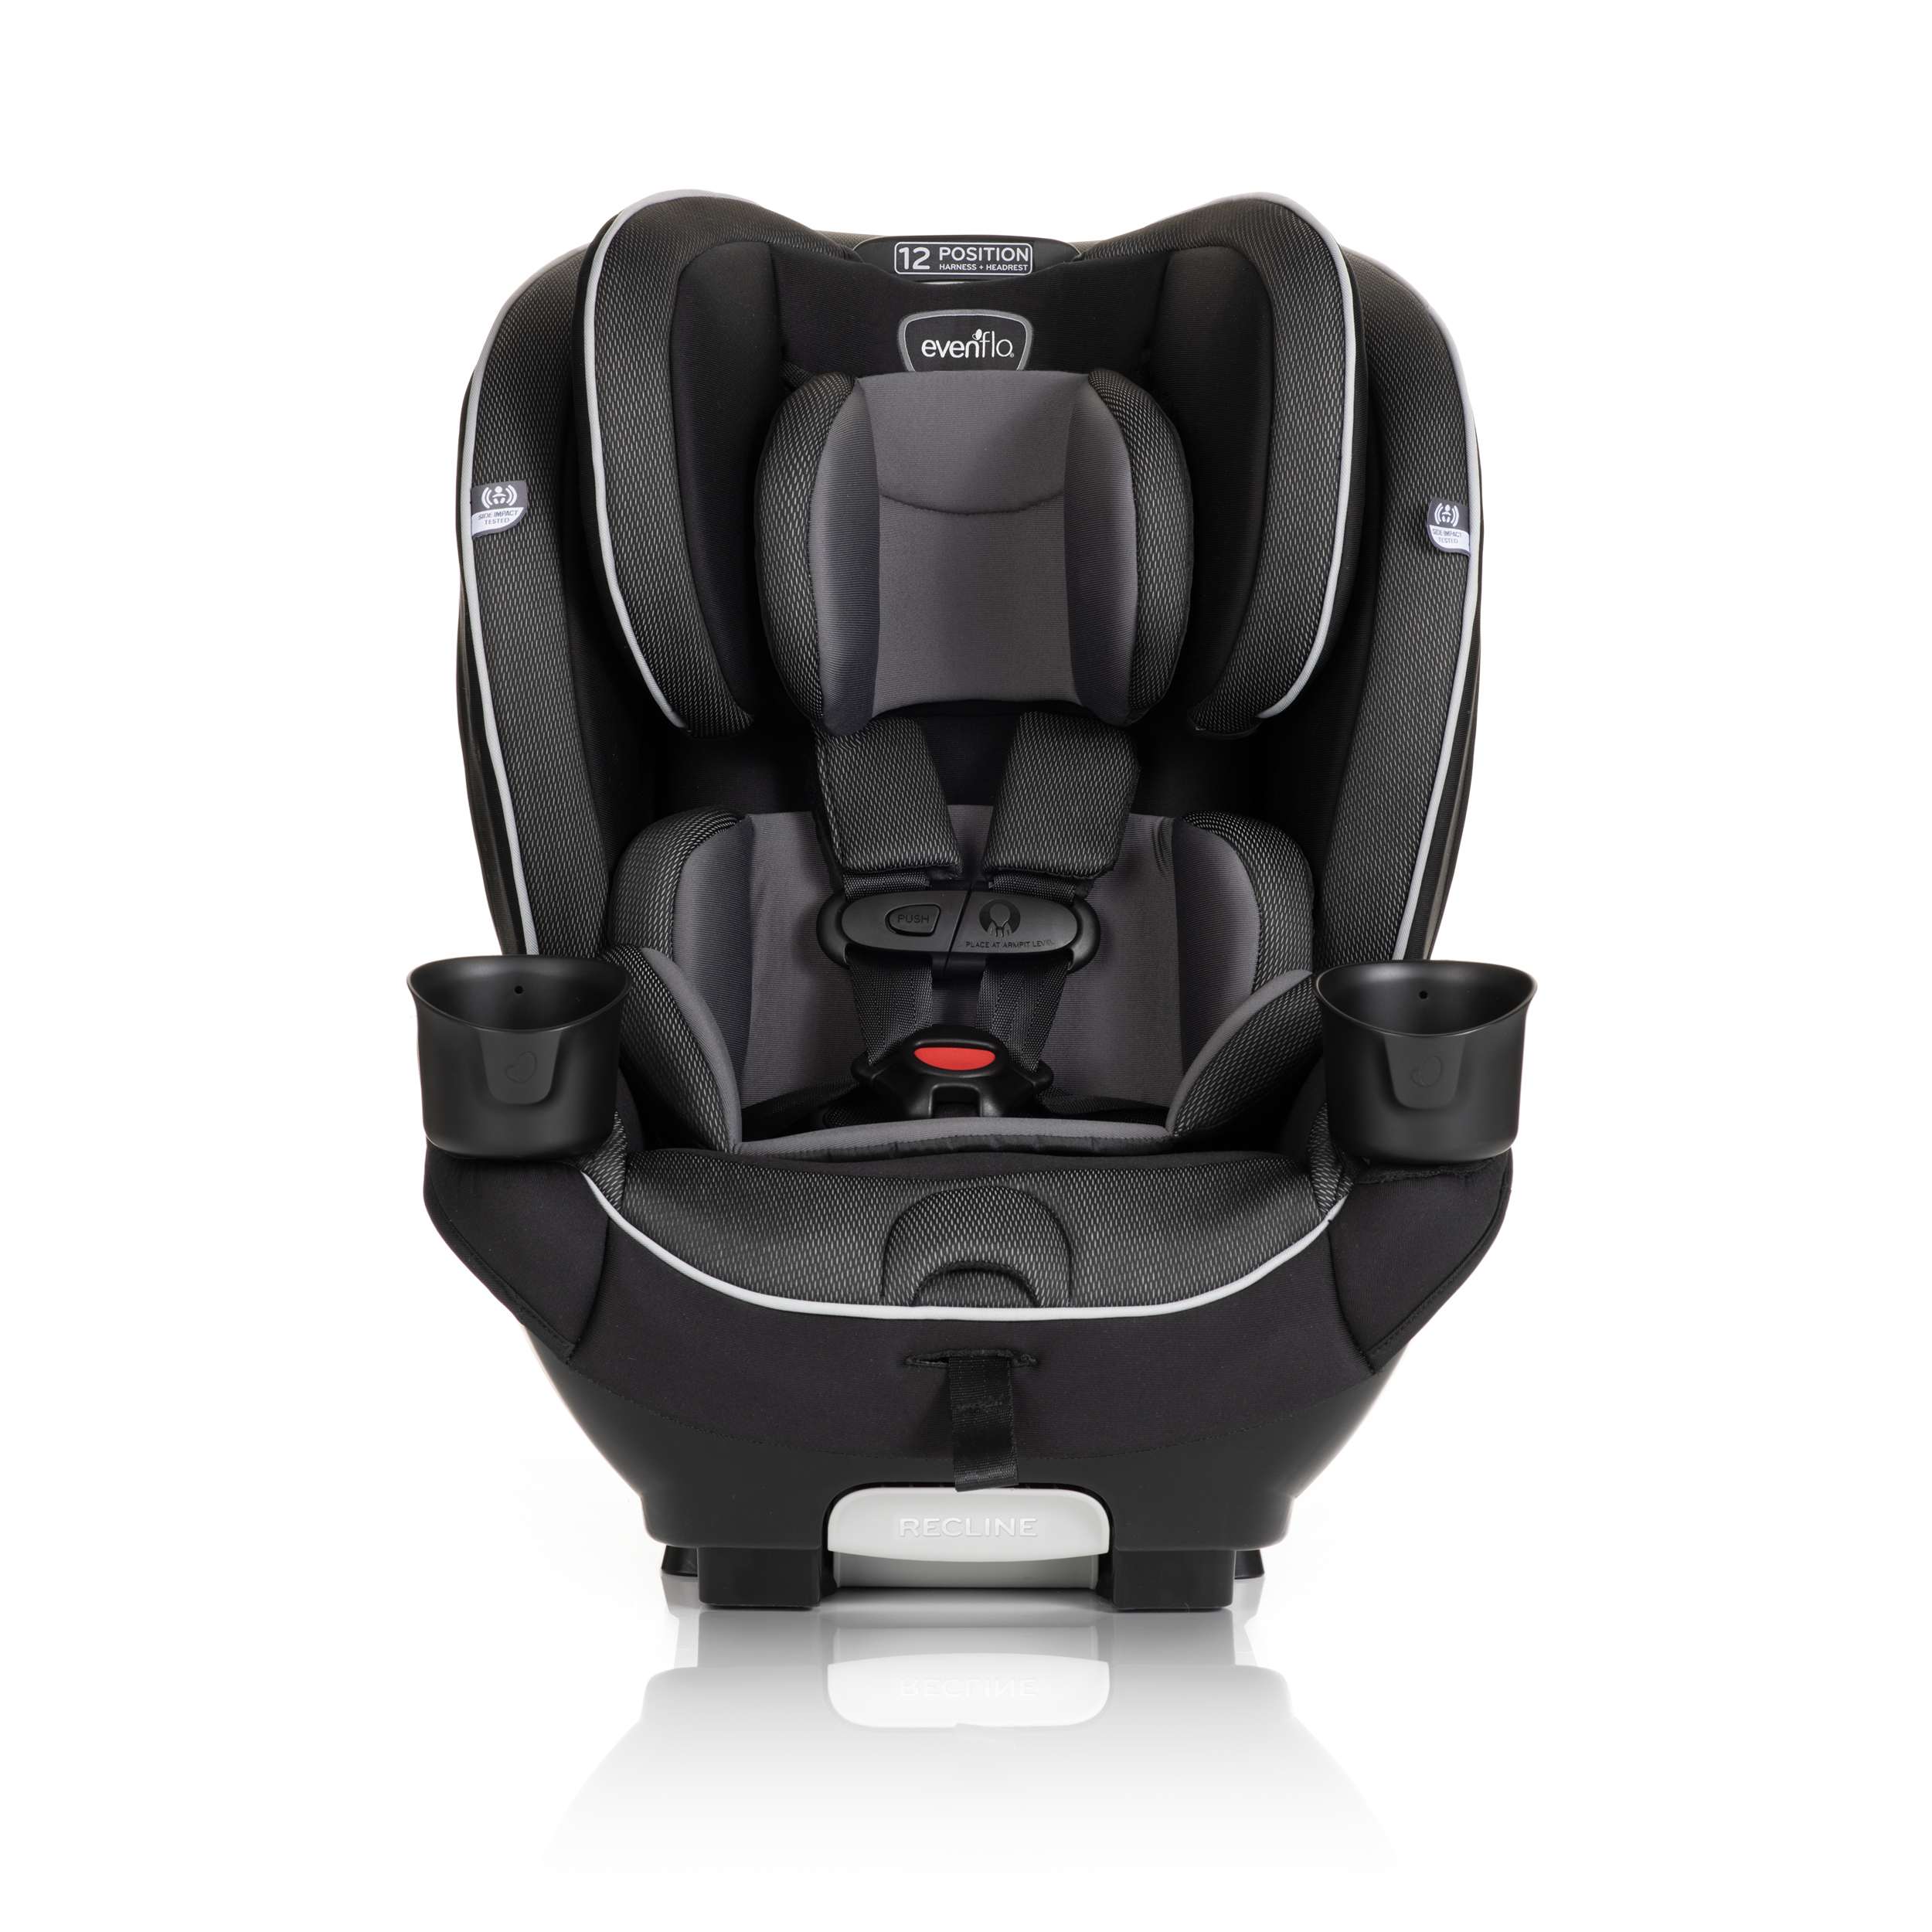 Evenflo EveryKid Convertible Car Seat, Livingston, Infant - 12 years - image 1 of 15